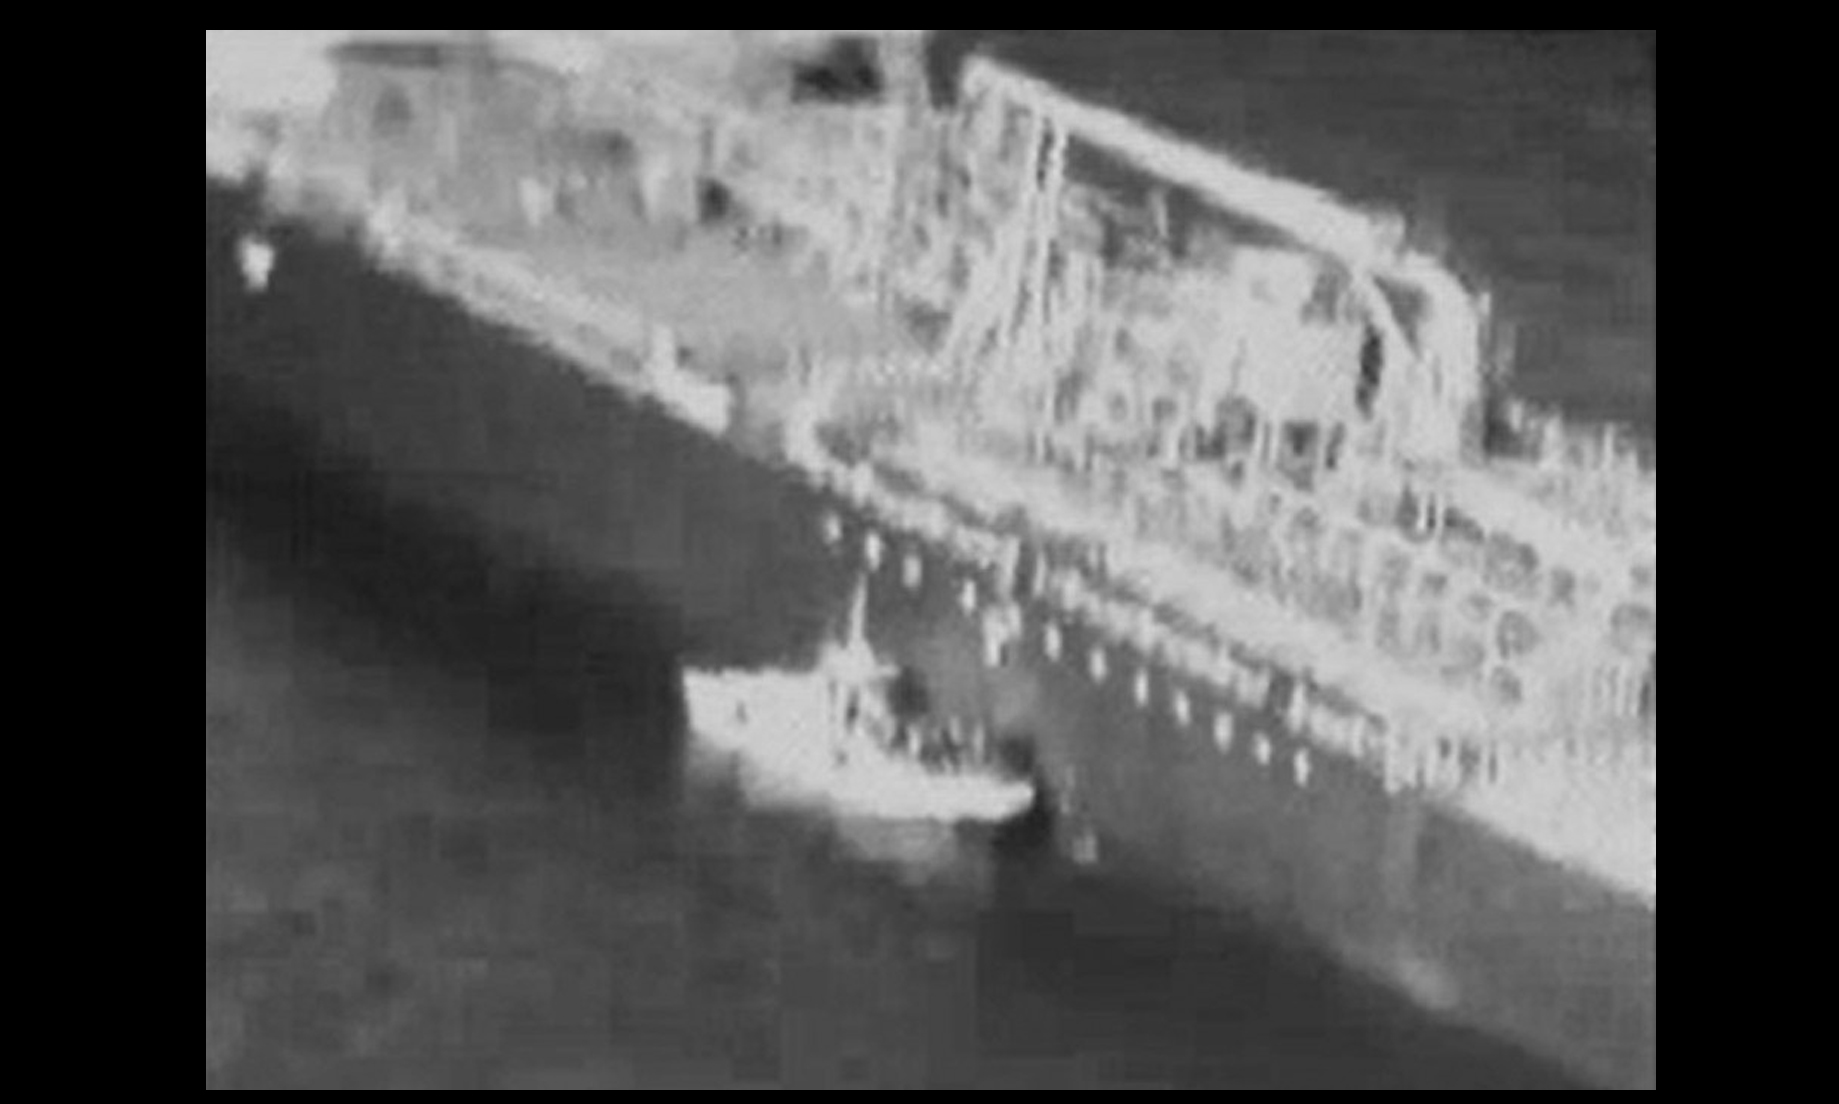 U.S. releases video it claims proves Iran’s role in tanker attacks